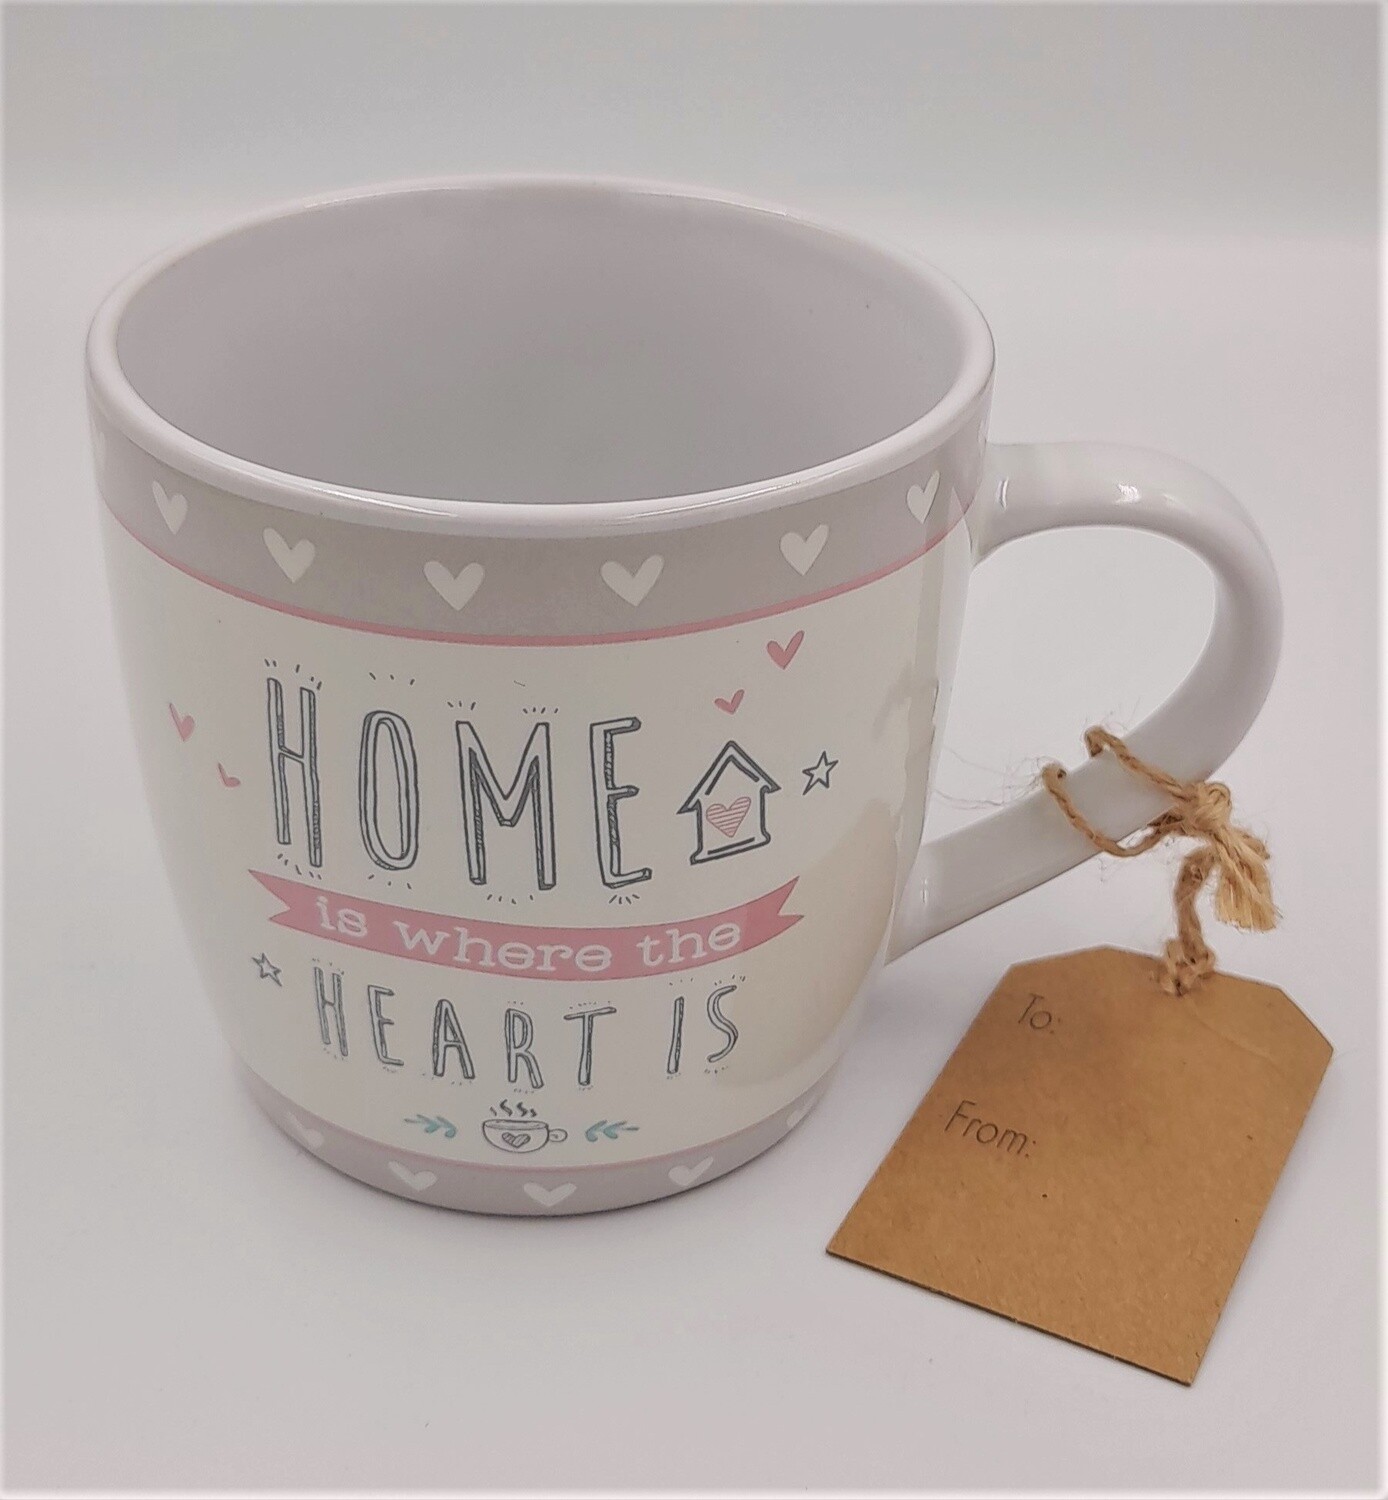 &#39;Home is where the heart is&#39; gift mug